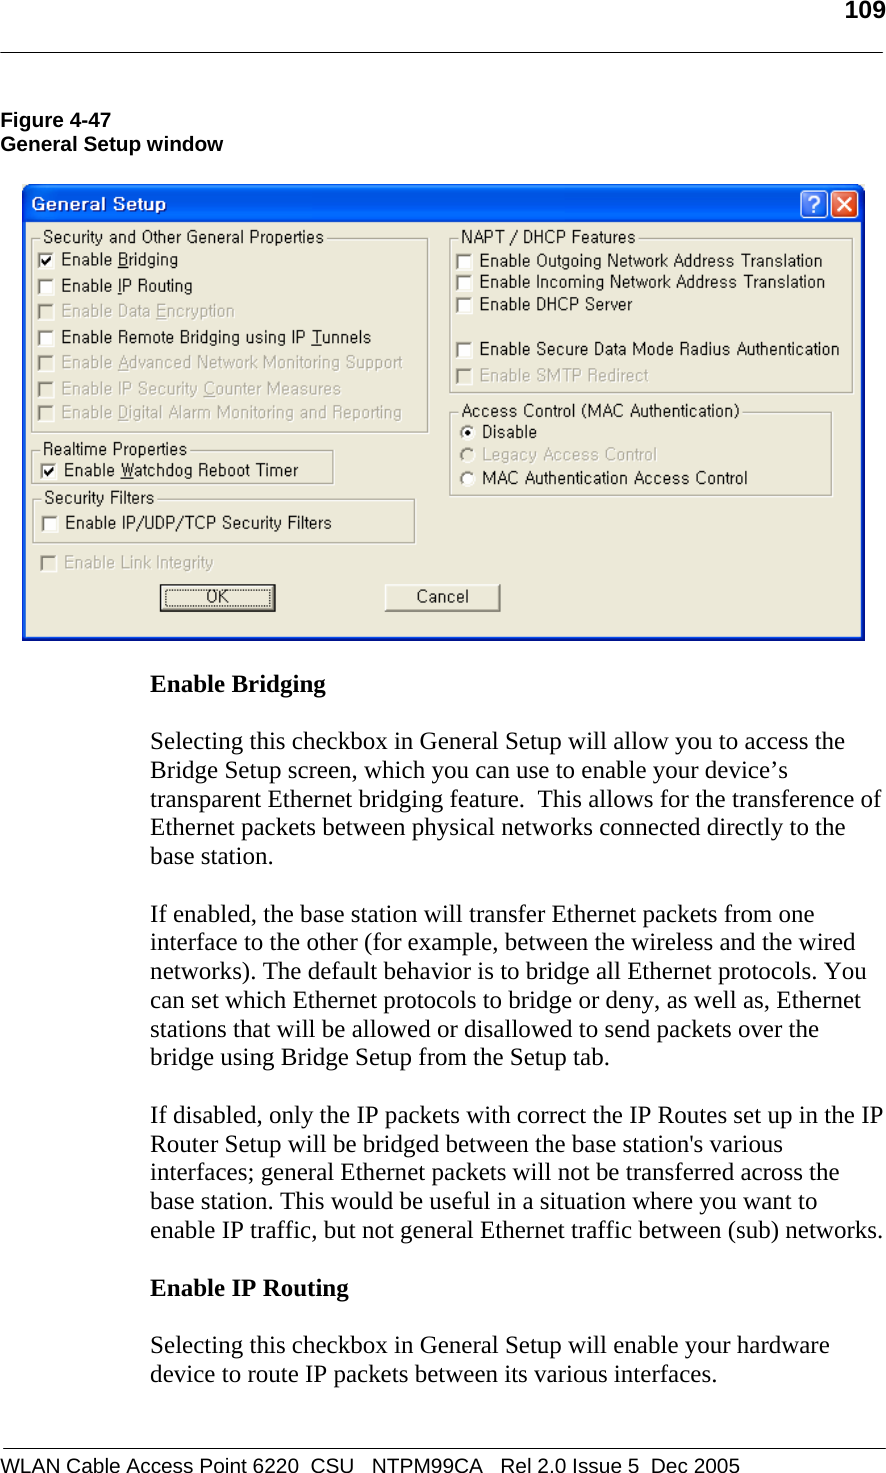   109  WLAN Cable Access Point 6220  CSU   NTPM99CA   Rel 2.0 Issue 5  Dec 2005 Figure 4-47 General Setup window    Enable Bridging  Selecting this checkbox in General Setup will allow you to access the Bridge Setup screen, which you can use to enable your device’s transparent Ethernet bridging feature.  This allows for the transference of Ethernet packets between physical networks connected directly to the base station.   If enabled, the base station will transfer Ethernet packets from one interface to the other (for example, between the wireless and the wired networks). The default behavior is to bridge all Ethernet protocols. You can set which Ethernet protocols to bridge or deny, as well as, Ethernet stations that will be allowed or disallowed to send packets over the bridge using Bridge Setup from the Setup tab.  If disabled, only the IP packets with correct the IP Routes set up in the IP Router Setup will be bridged between the base station&apos;s various interfaces; general Ethernet packets will not be transferred across the base station. This would be useful in a situation where you want to enable IP traffic, but not general Ethernet traffic between (sub) networks.  Enable IP Routing  Selecting this checkbox in General Setup will enable your hardware device to route IP packets between its various interfaces.  